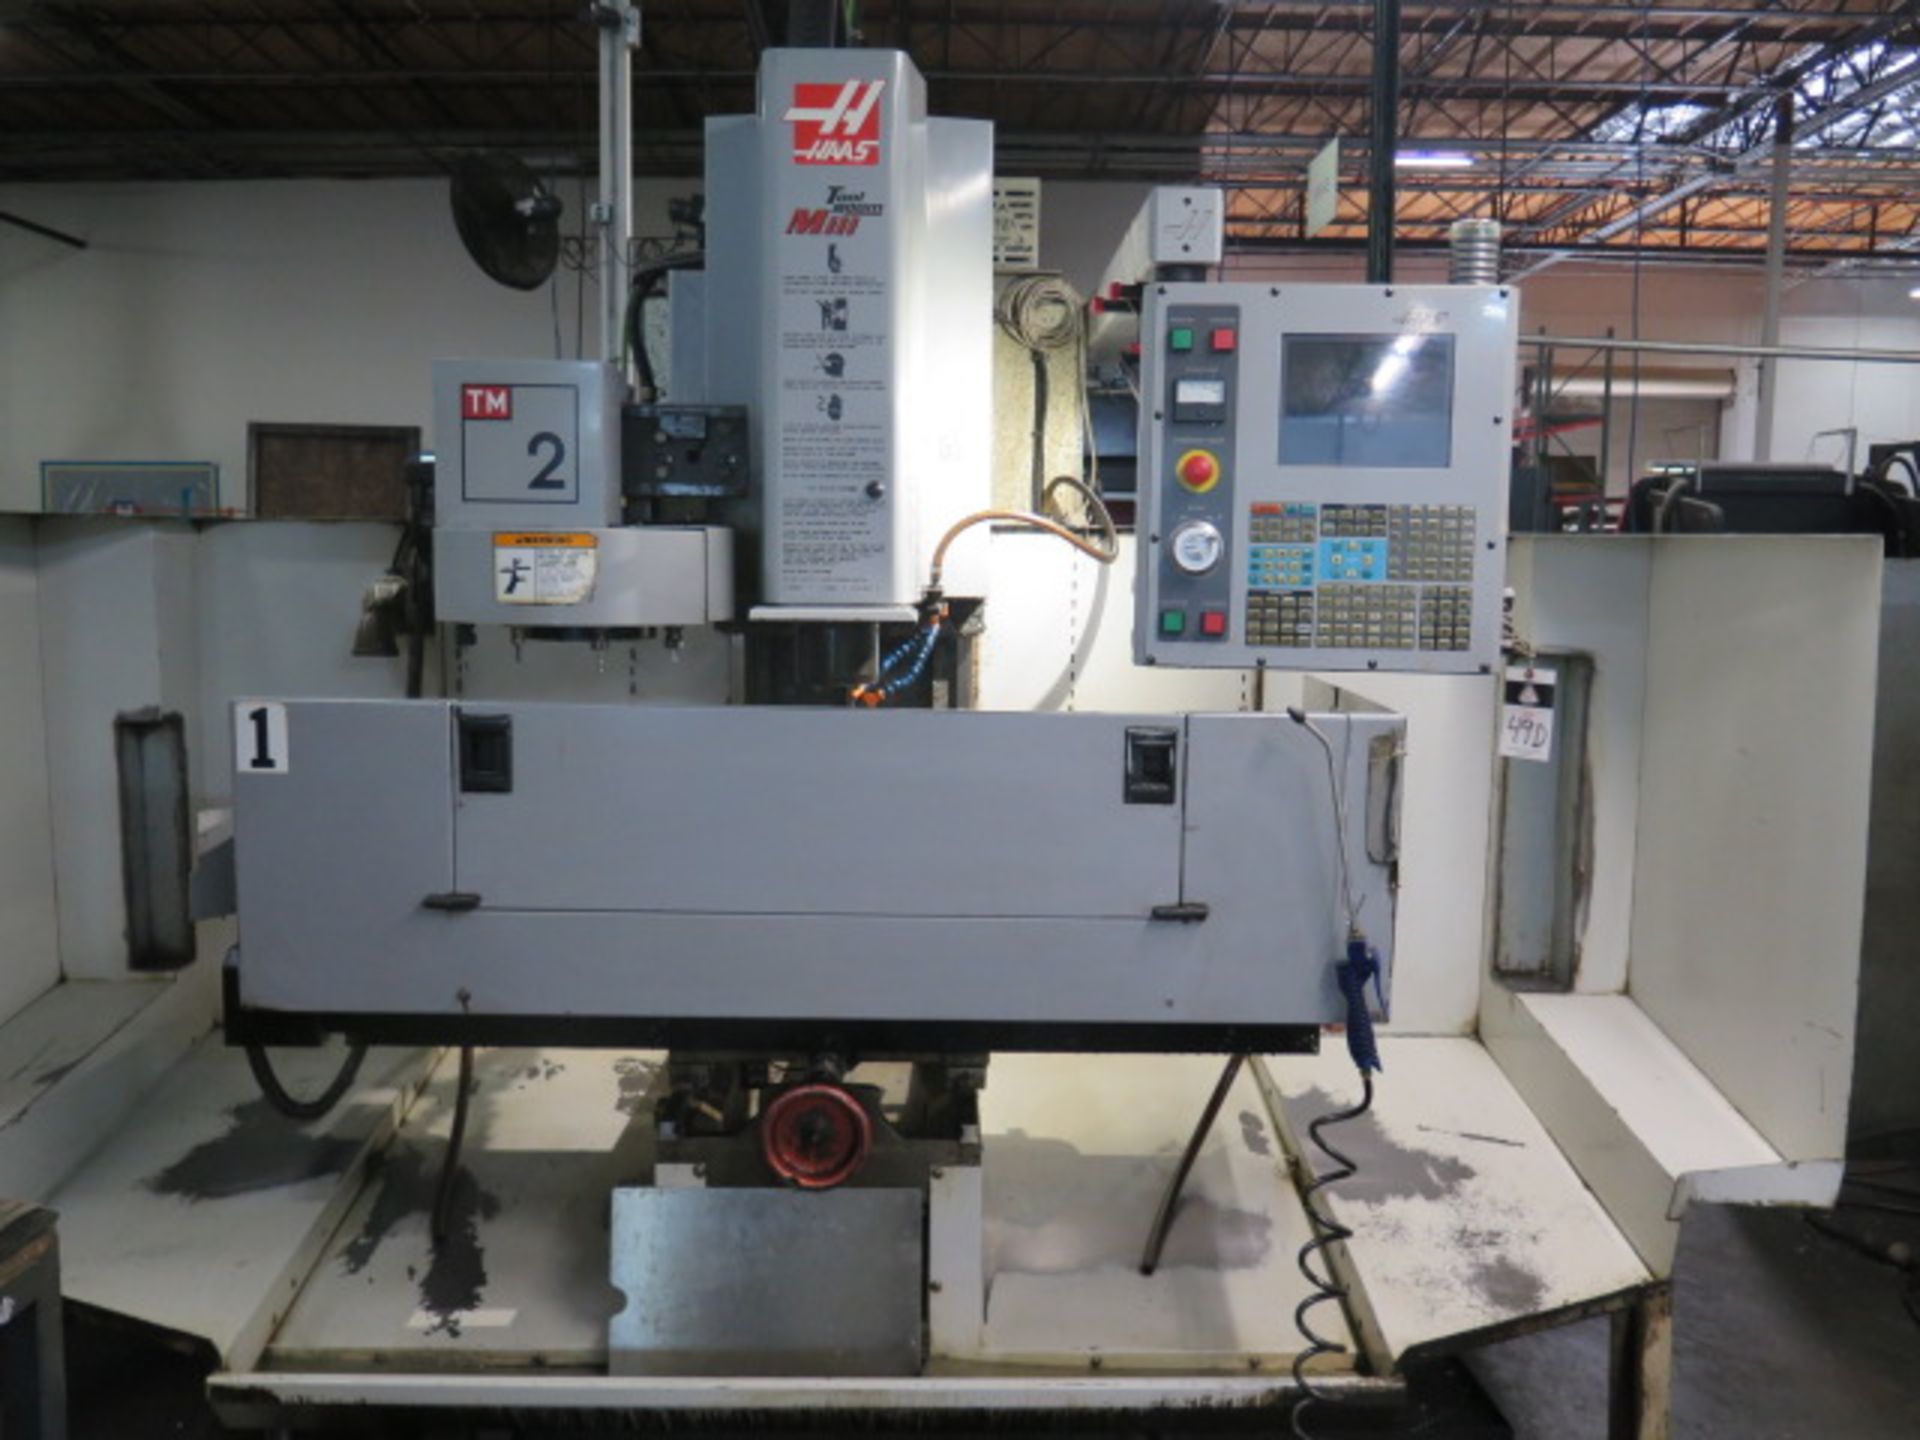 2004 Haas TM-2 “Mini Mill” CNC VMC s/n 37711 w/ Haas Controls, 10 ATC, SOLD AS IS, LIVERMORE, CA